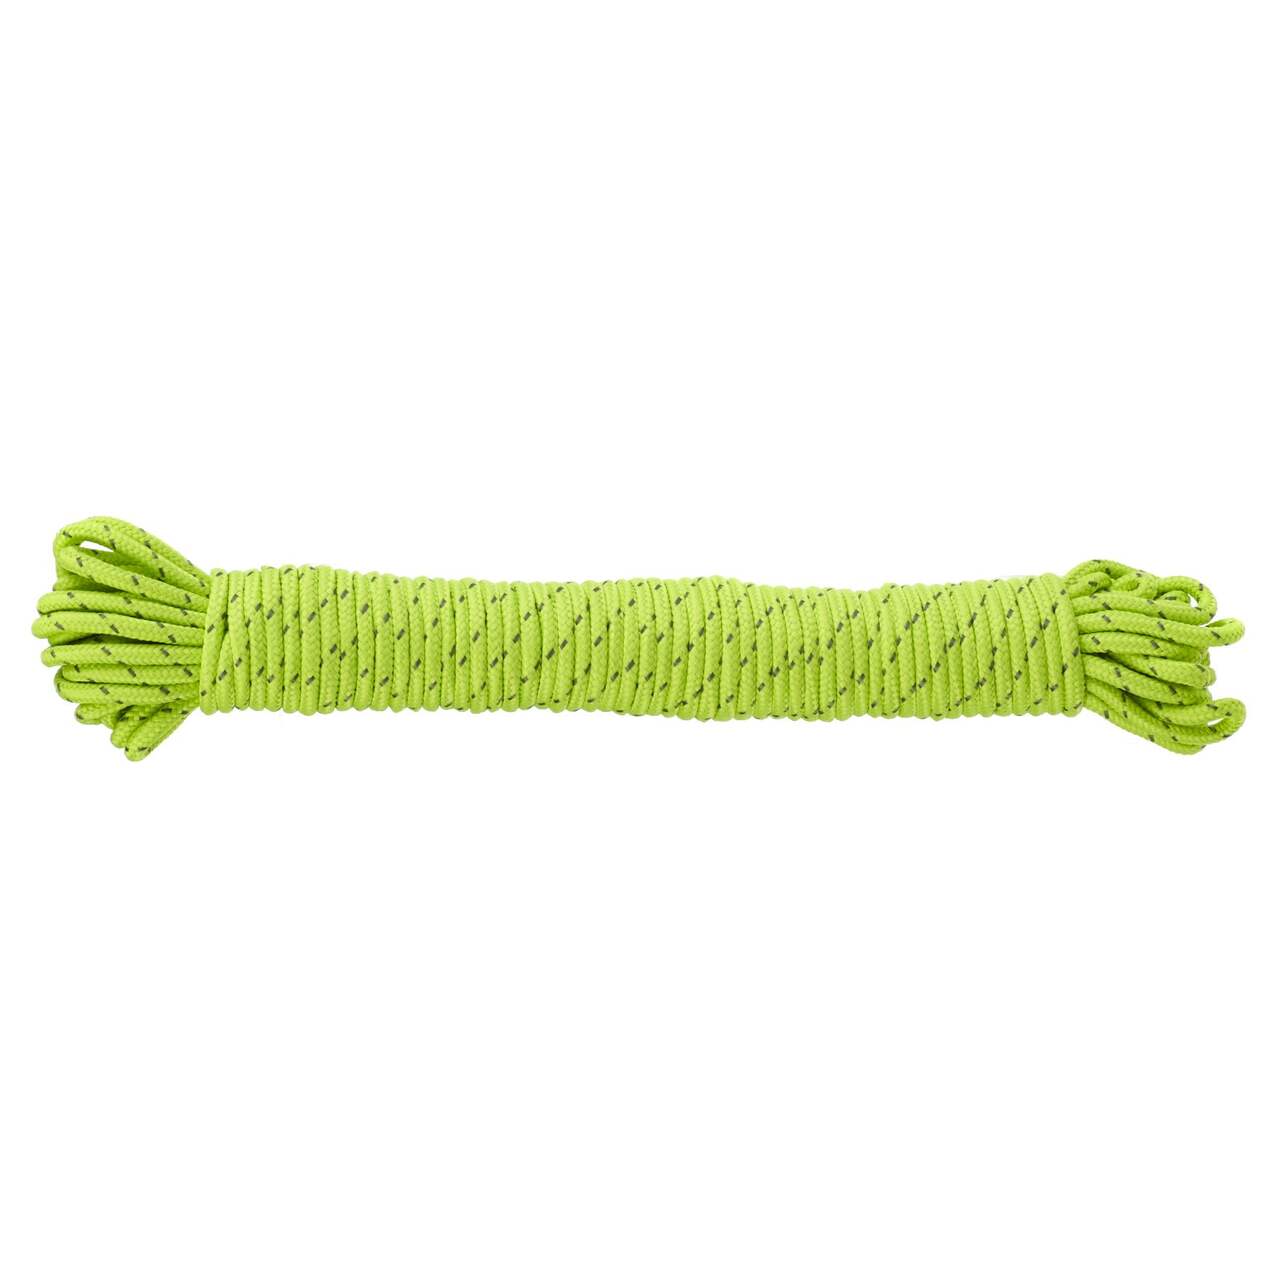 Outbound Reflective High-Visibility Utility Paracord Rope w/ Winder For  Camping & Outdoors, 15m